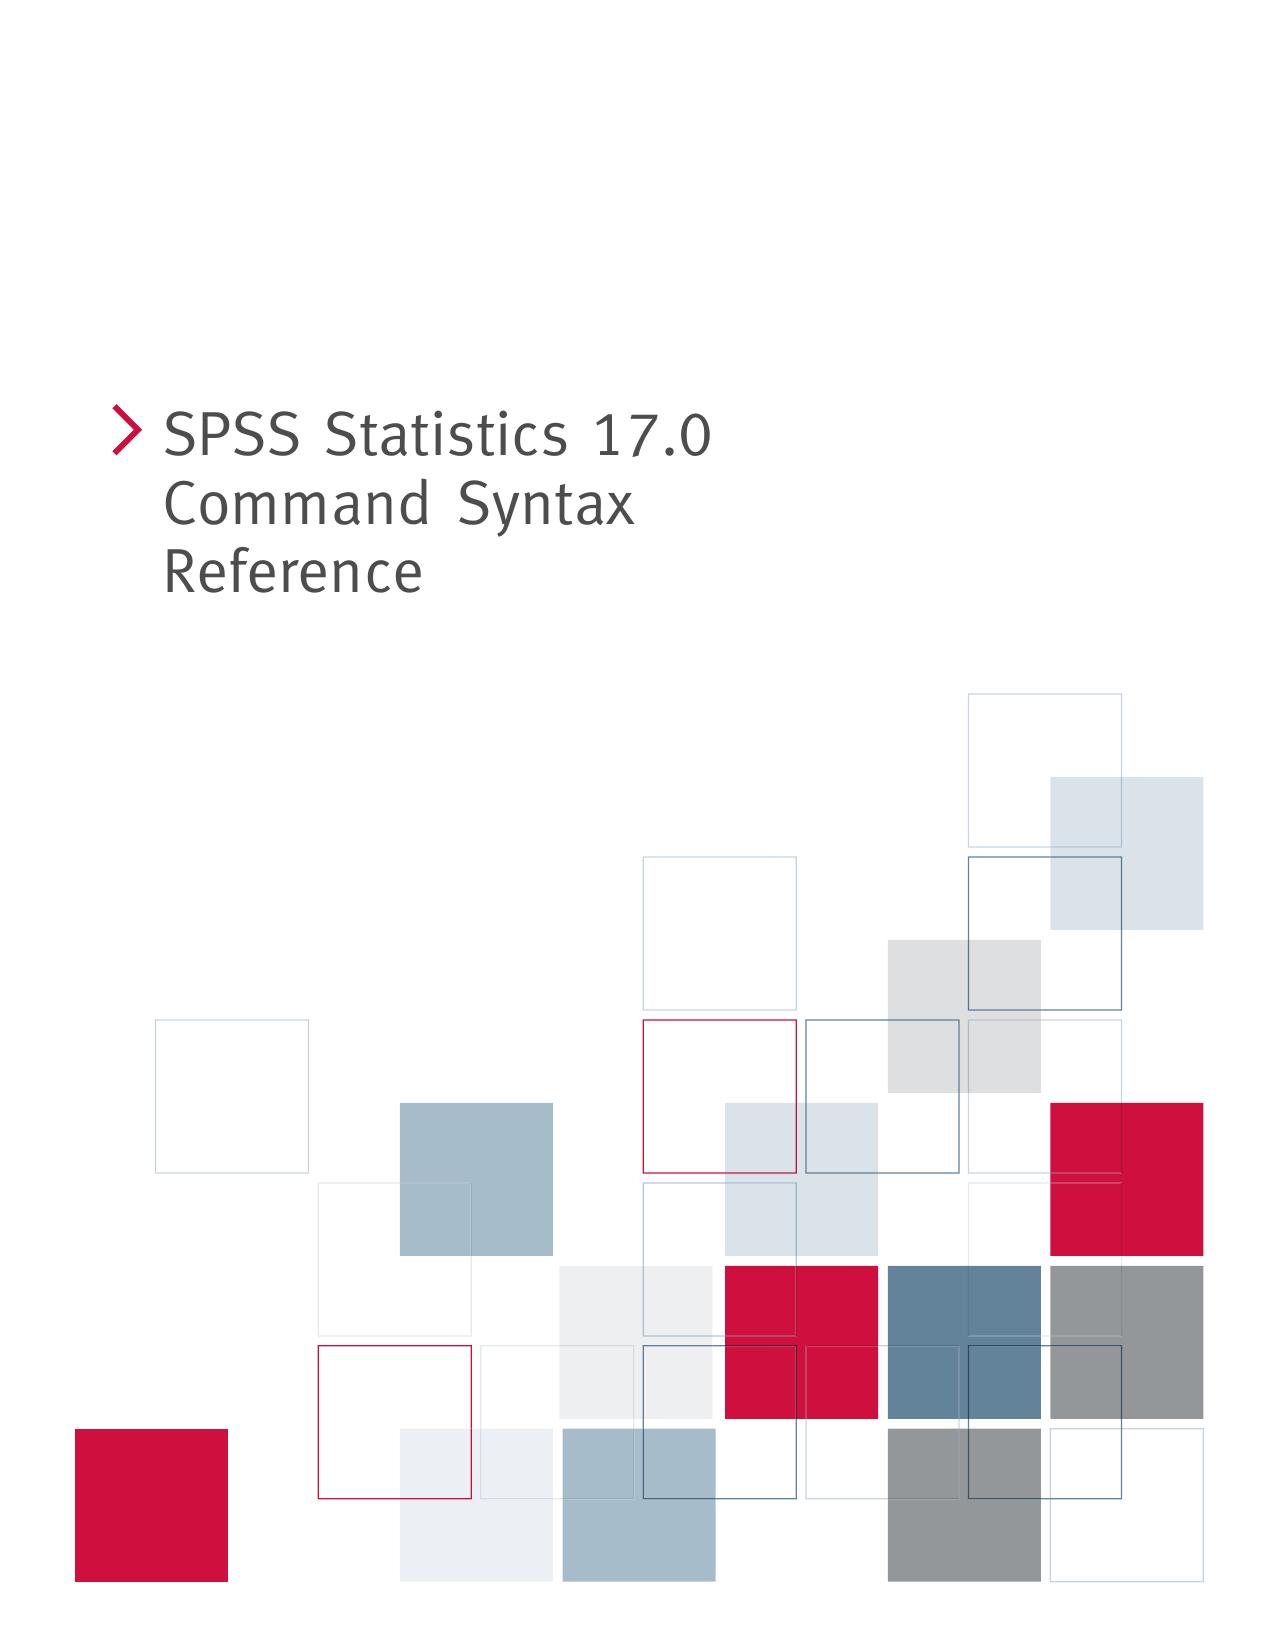 SPSS Statistics 17.0 Command Syntax Reference